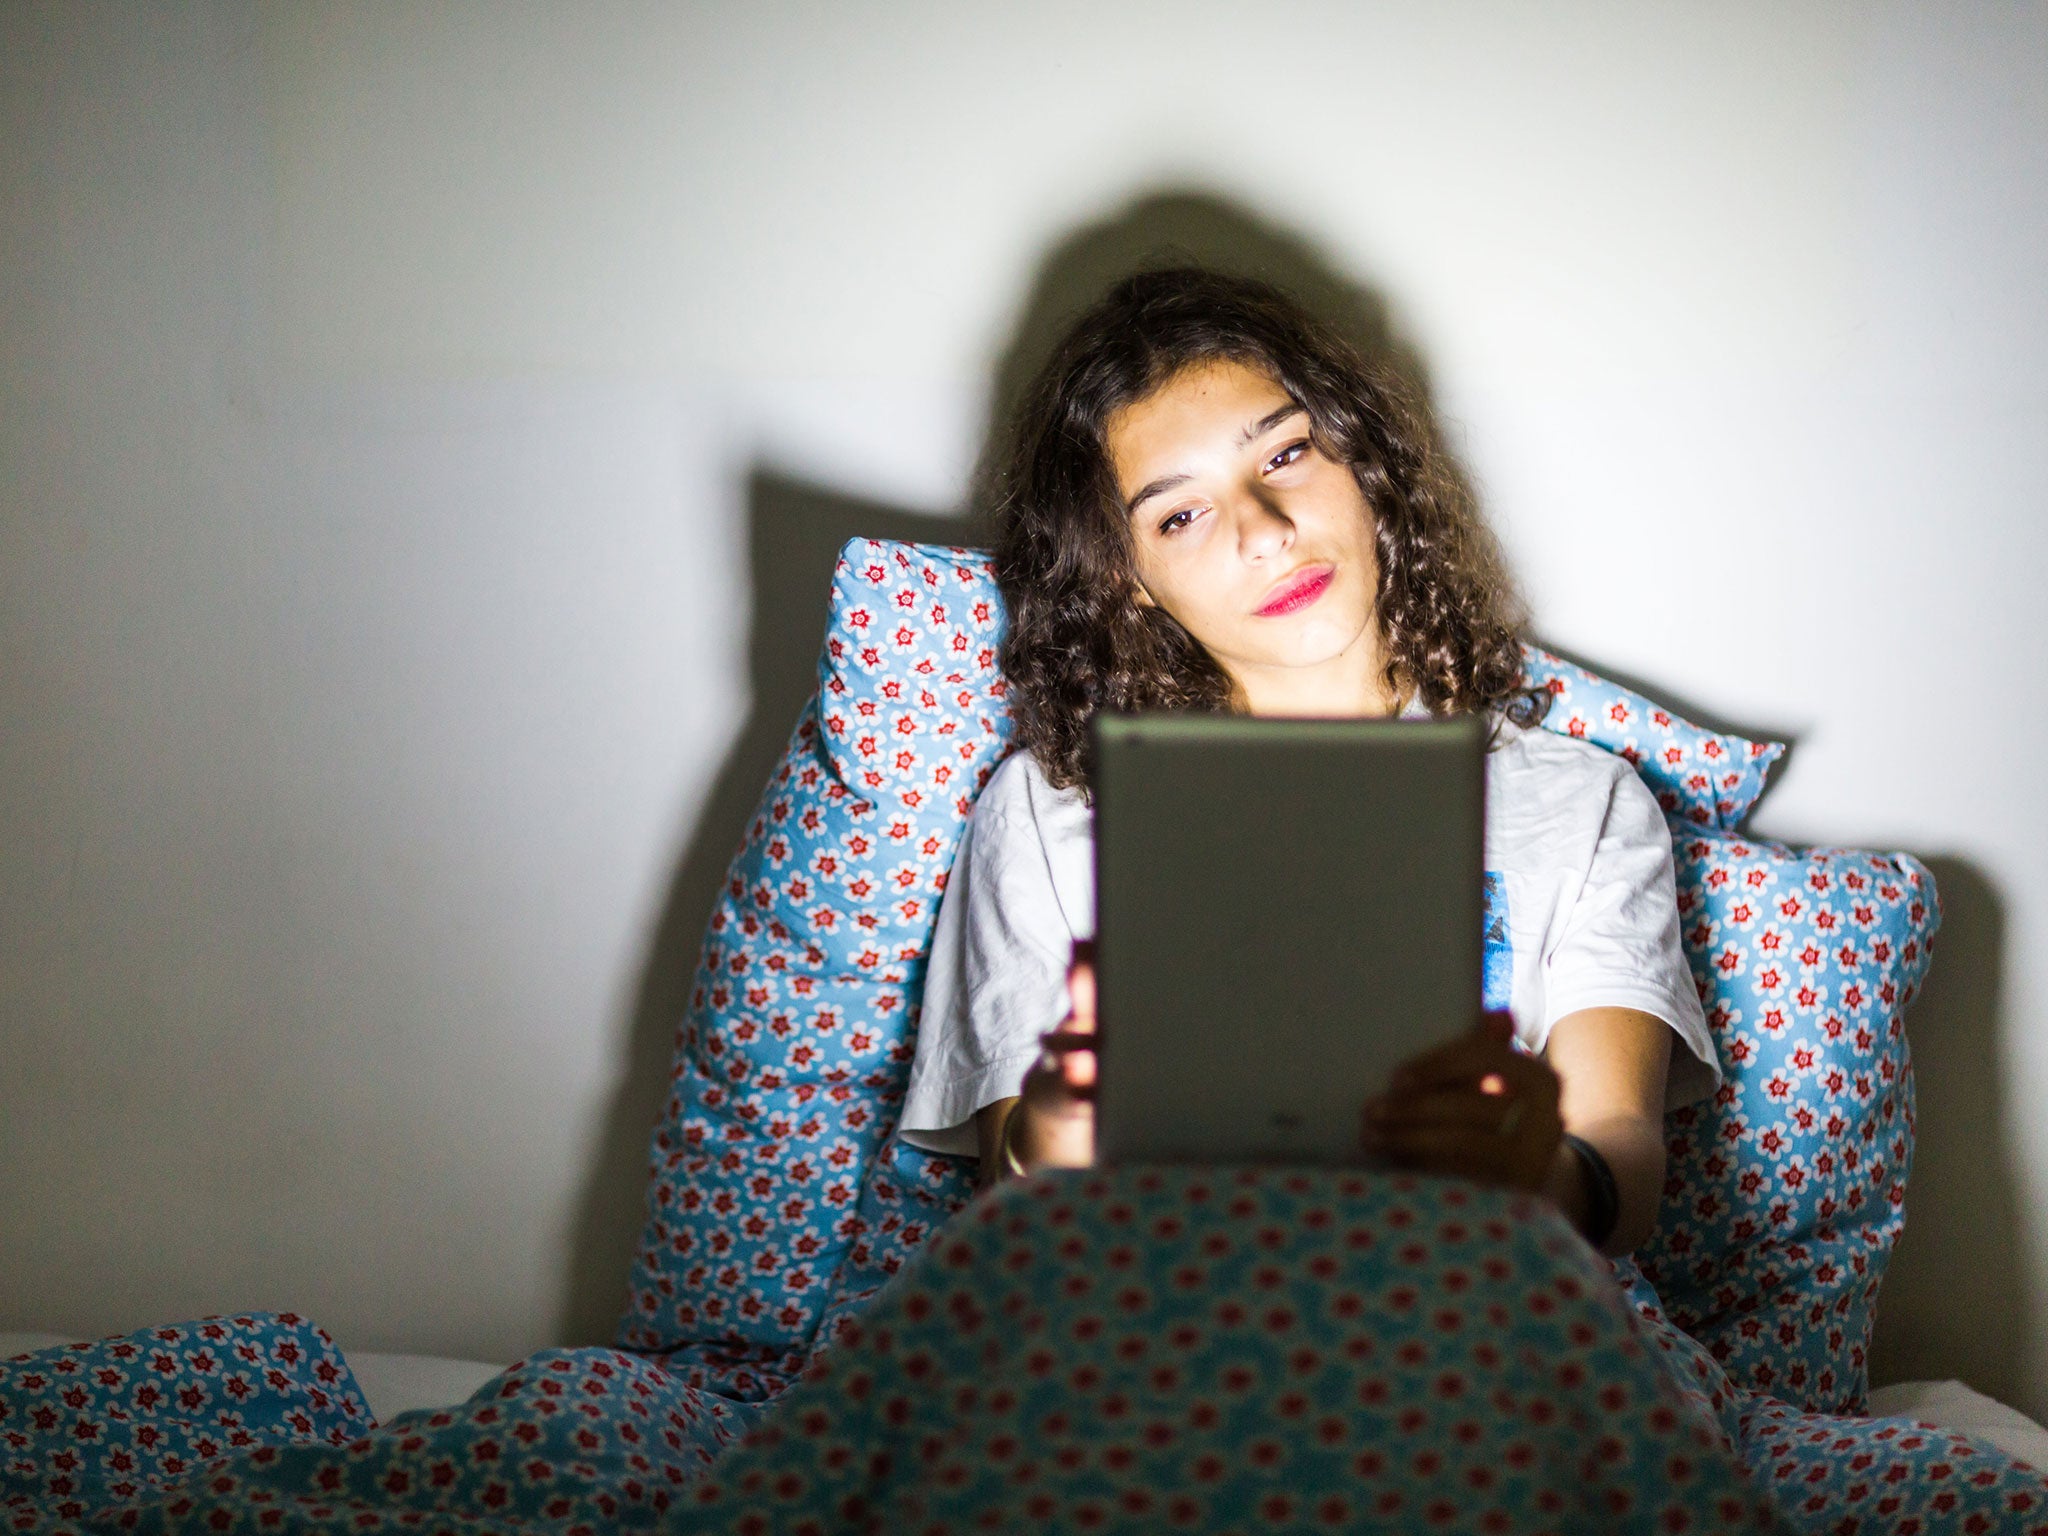 Scientists have claimed that reading books on an iPad and similar e-readers in the evening may disturb sleep patterns because of the type of light the device emits